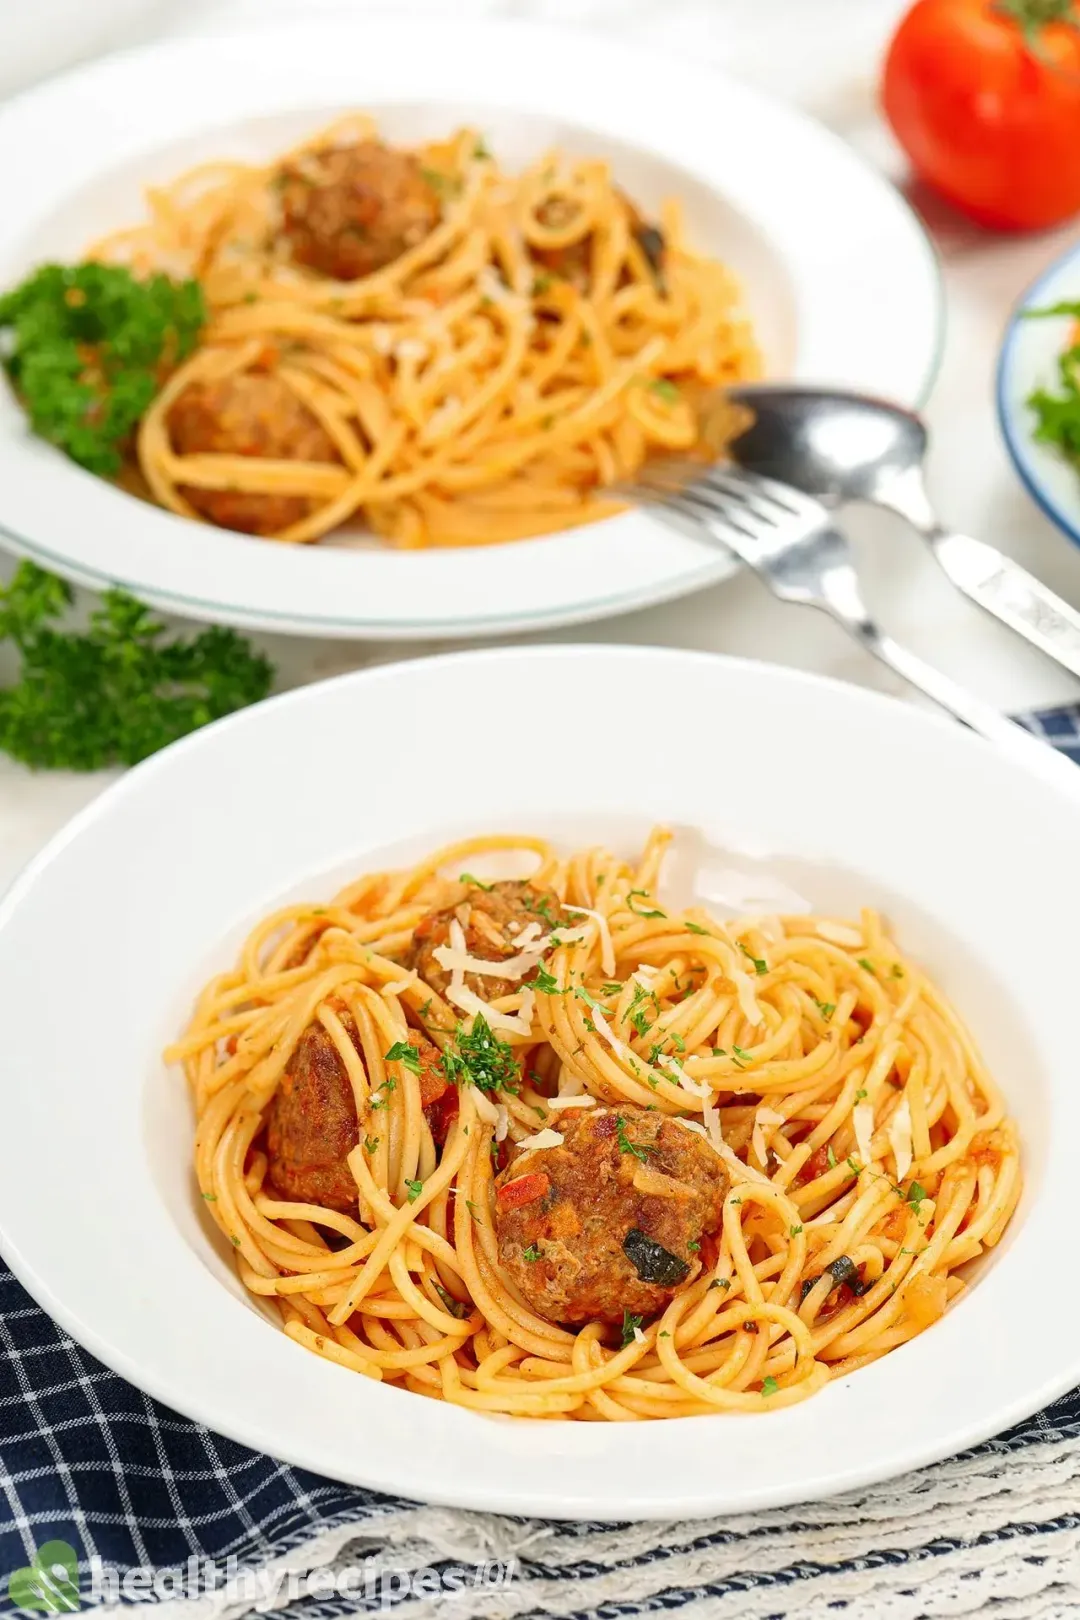 How to Store and Reheat Spaghetti and Meatballs